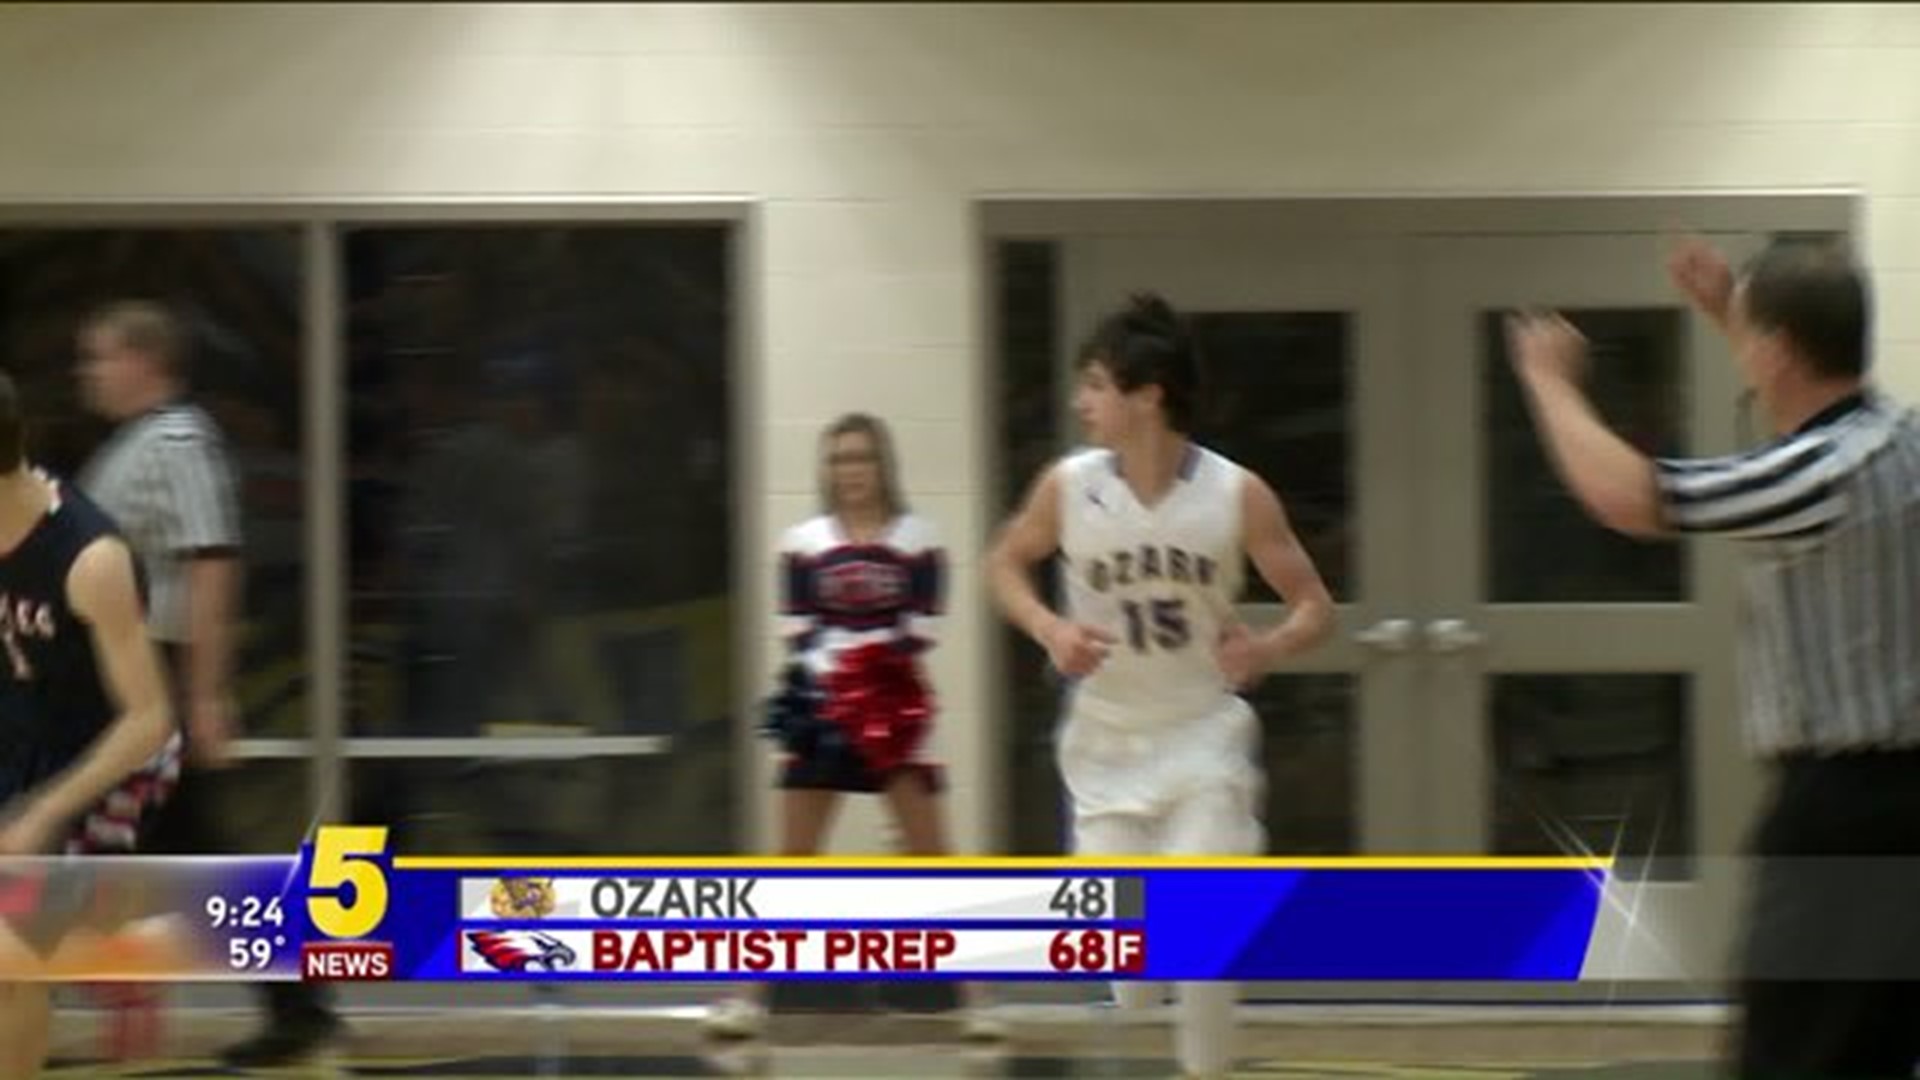 Ozark Falls Short In 4A-North Title Game